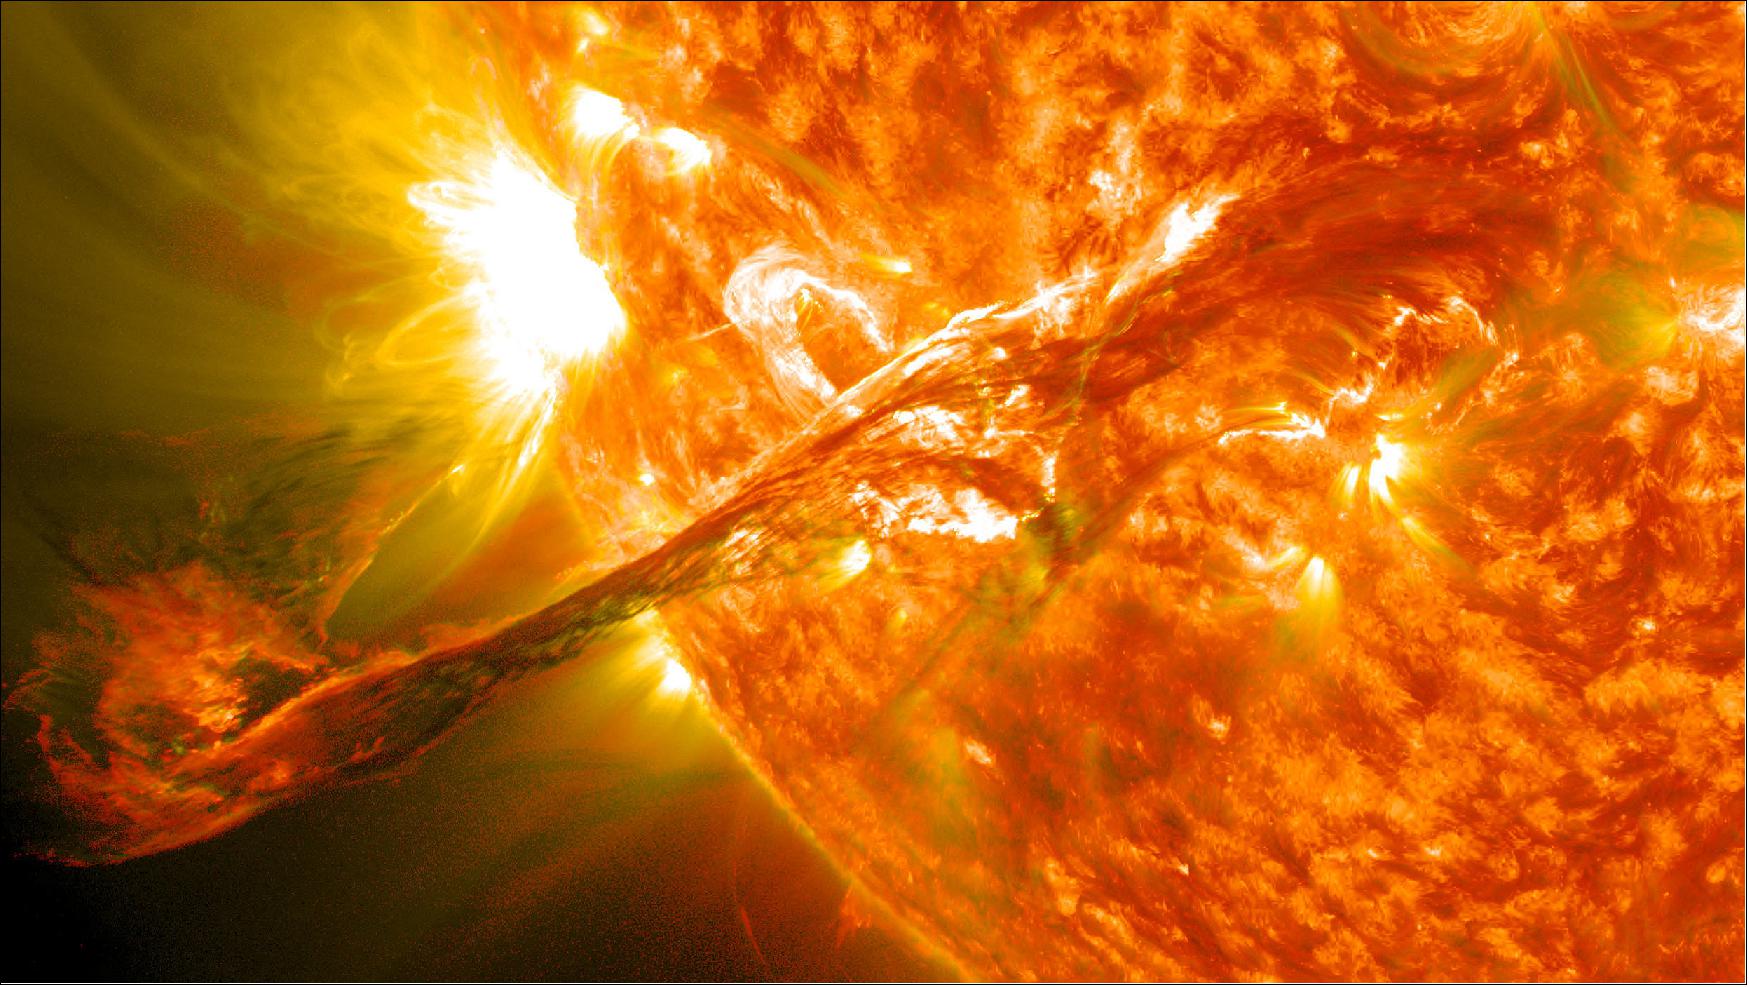 Figure 1: Composite image of an erupting solar prominence observed by SDO on Aug. 31, 2012 (image credit: NASA / SDO / GSFC)